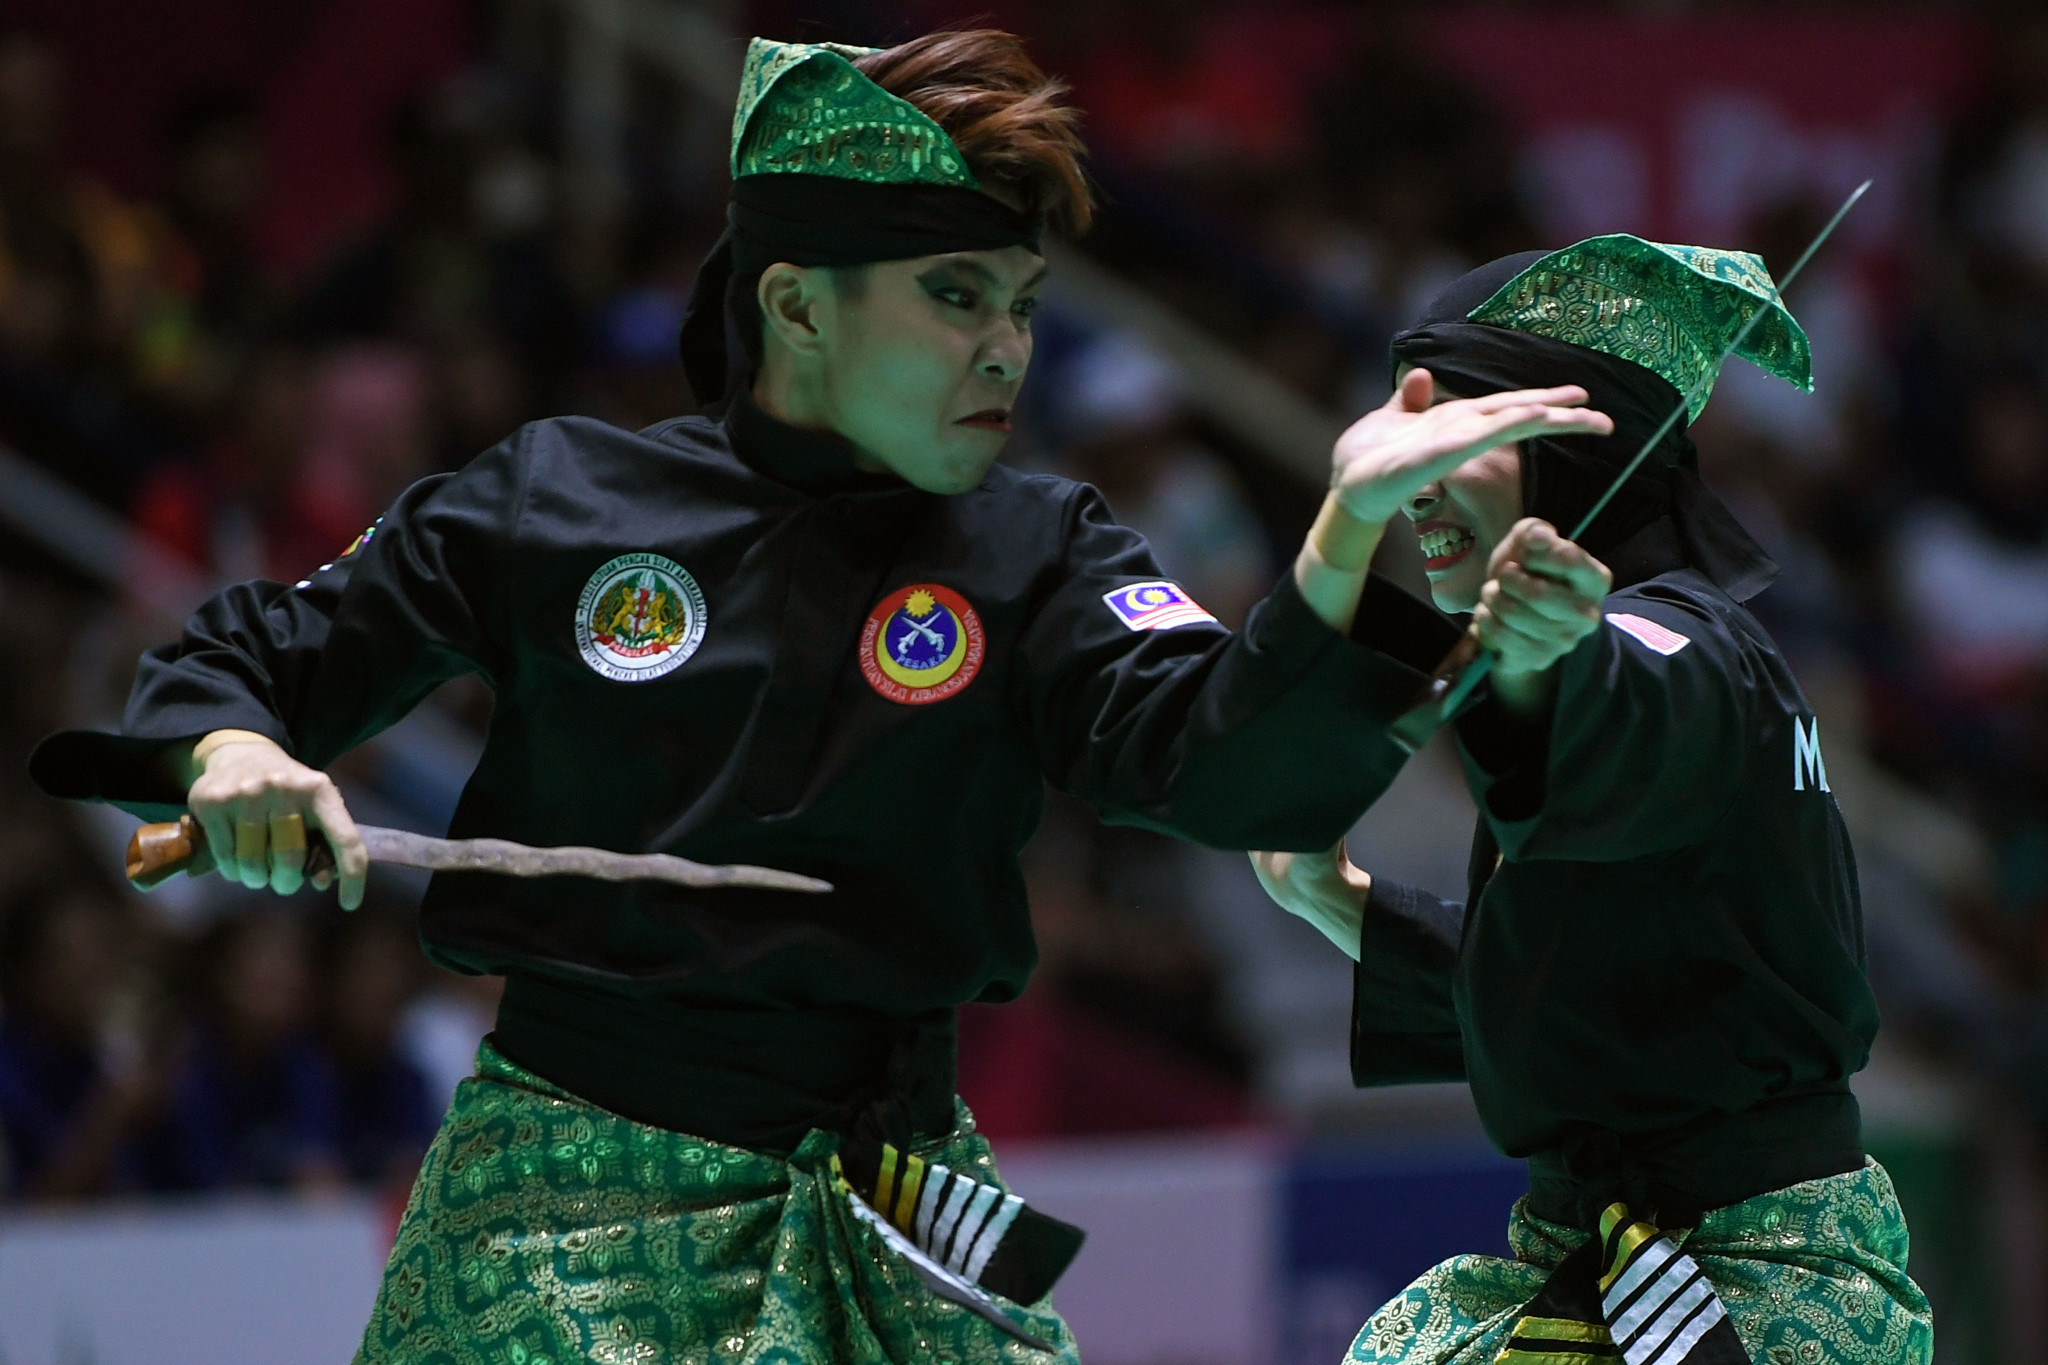 The secretary general of the Jordan Olympic Committee, Nasser Majali, has suggested the medals Indonesia won in pencak silat here do not have "true value" ©Getty Images